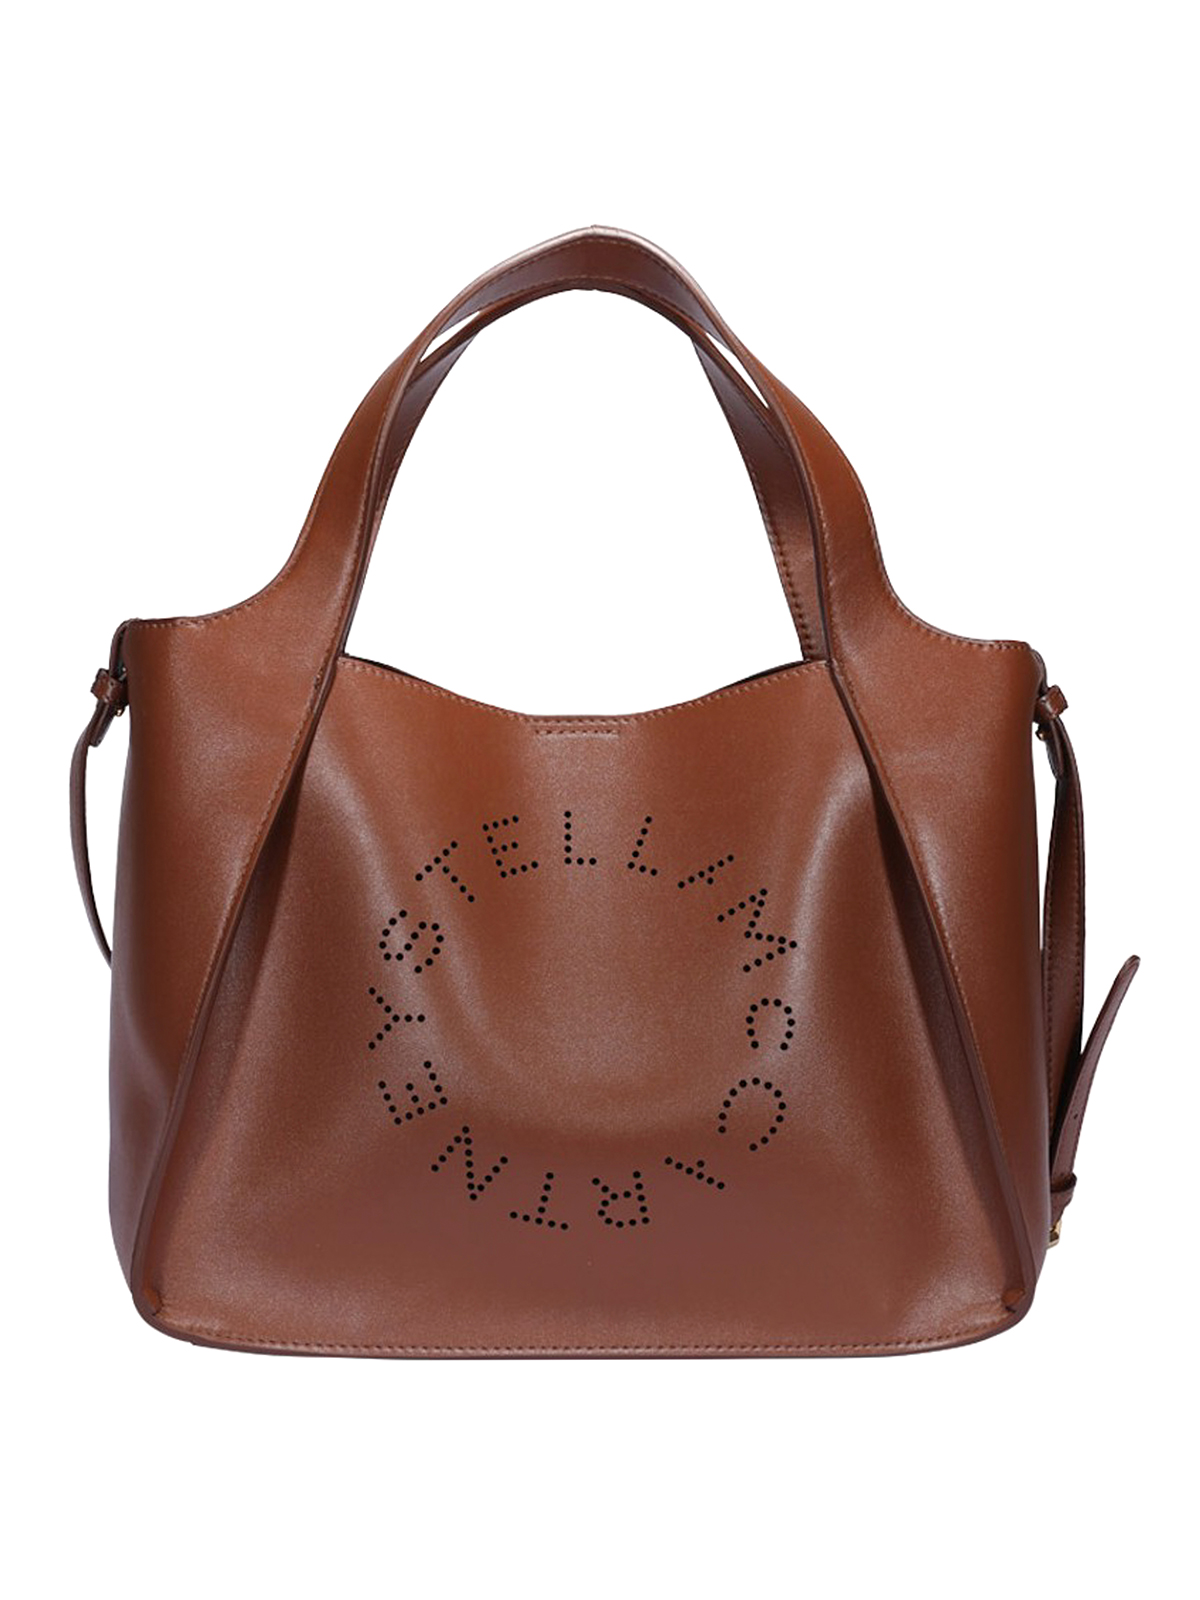 STELLA MCCARTNEY PERFORATED LOGO FAUX LEATHER BAG